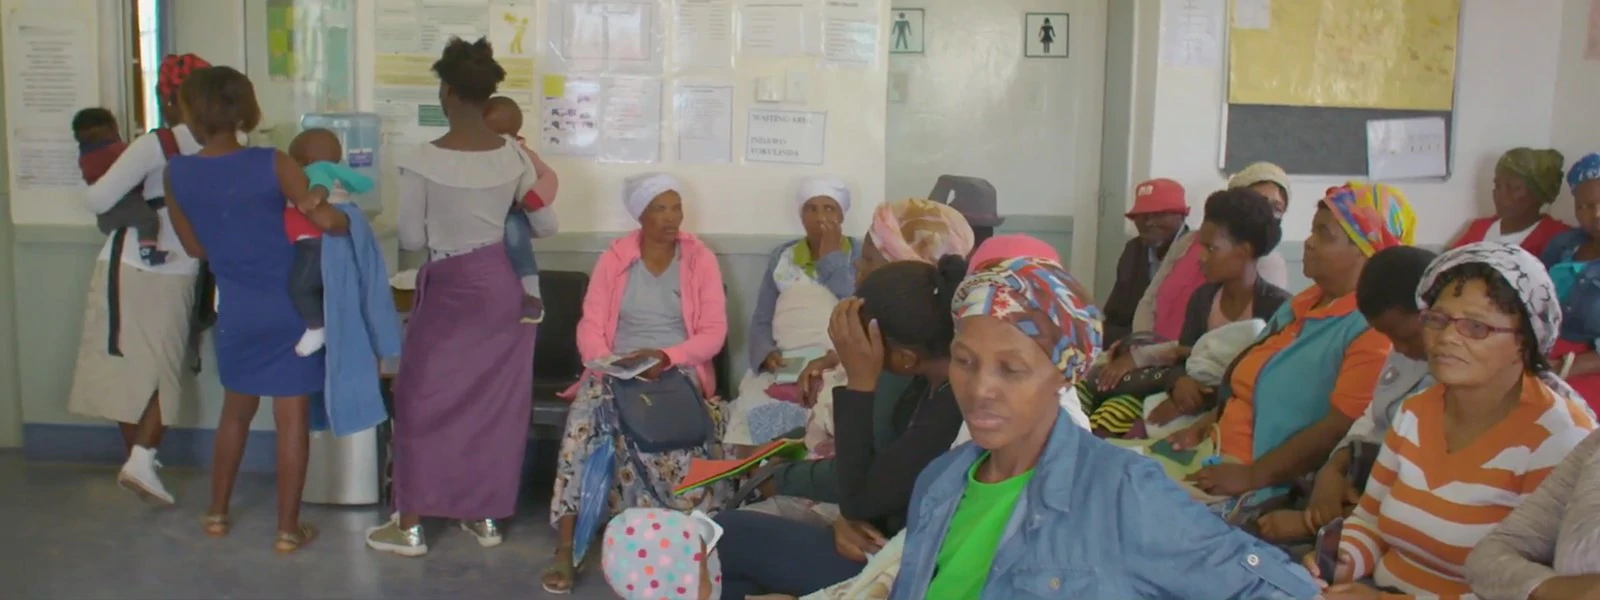 A group of women in South Africa in the waiting room of a healthcare center.